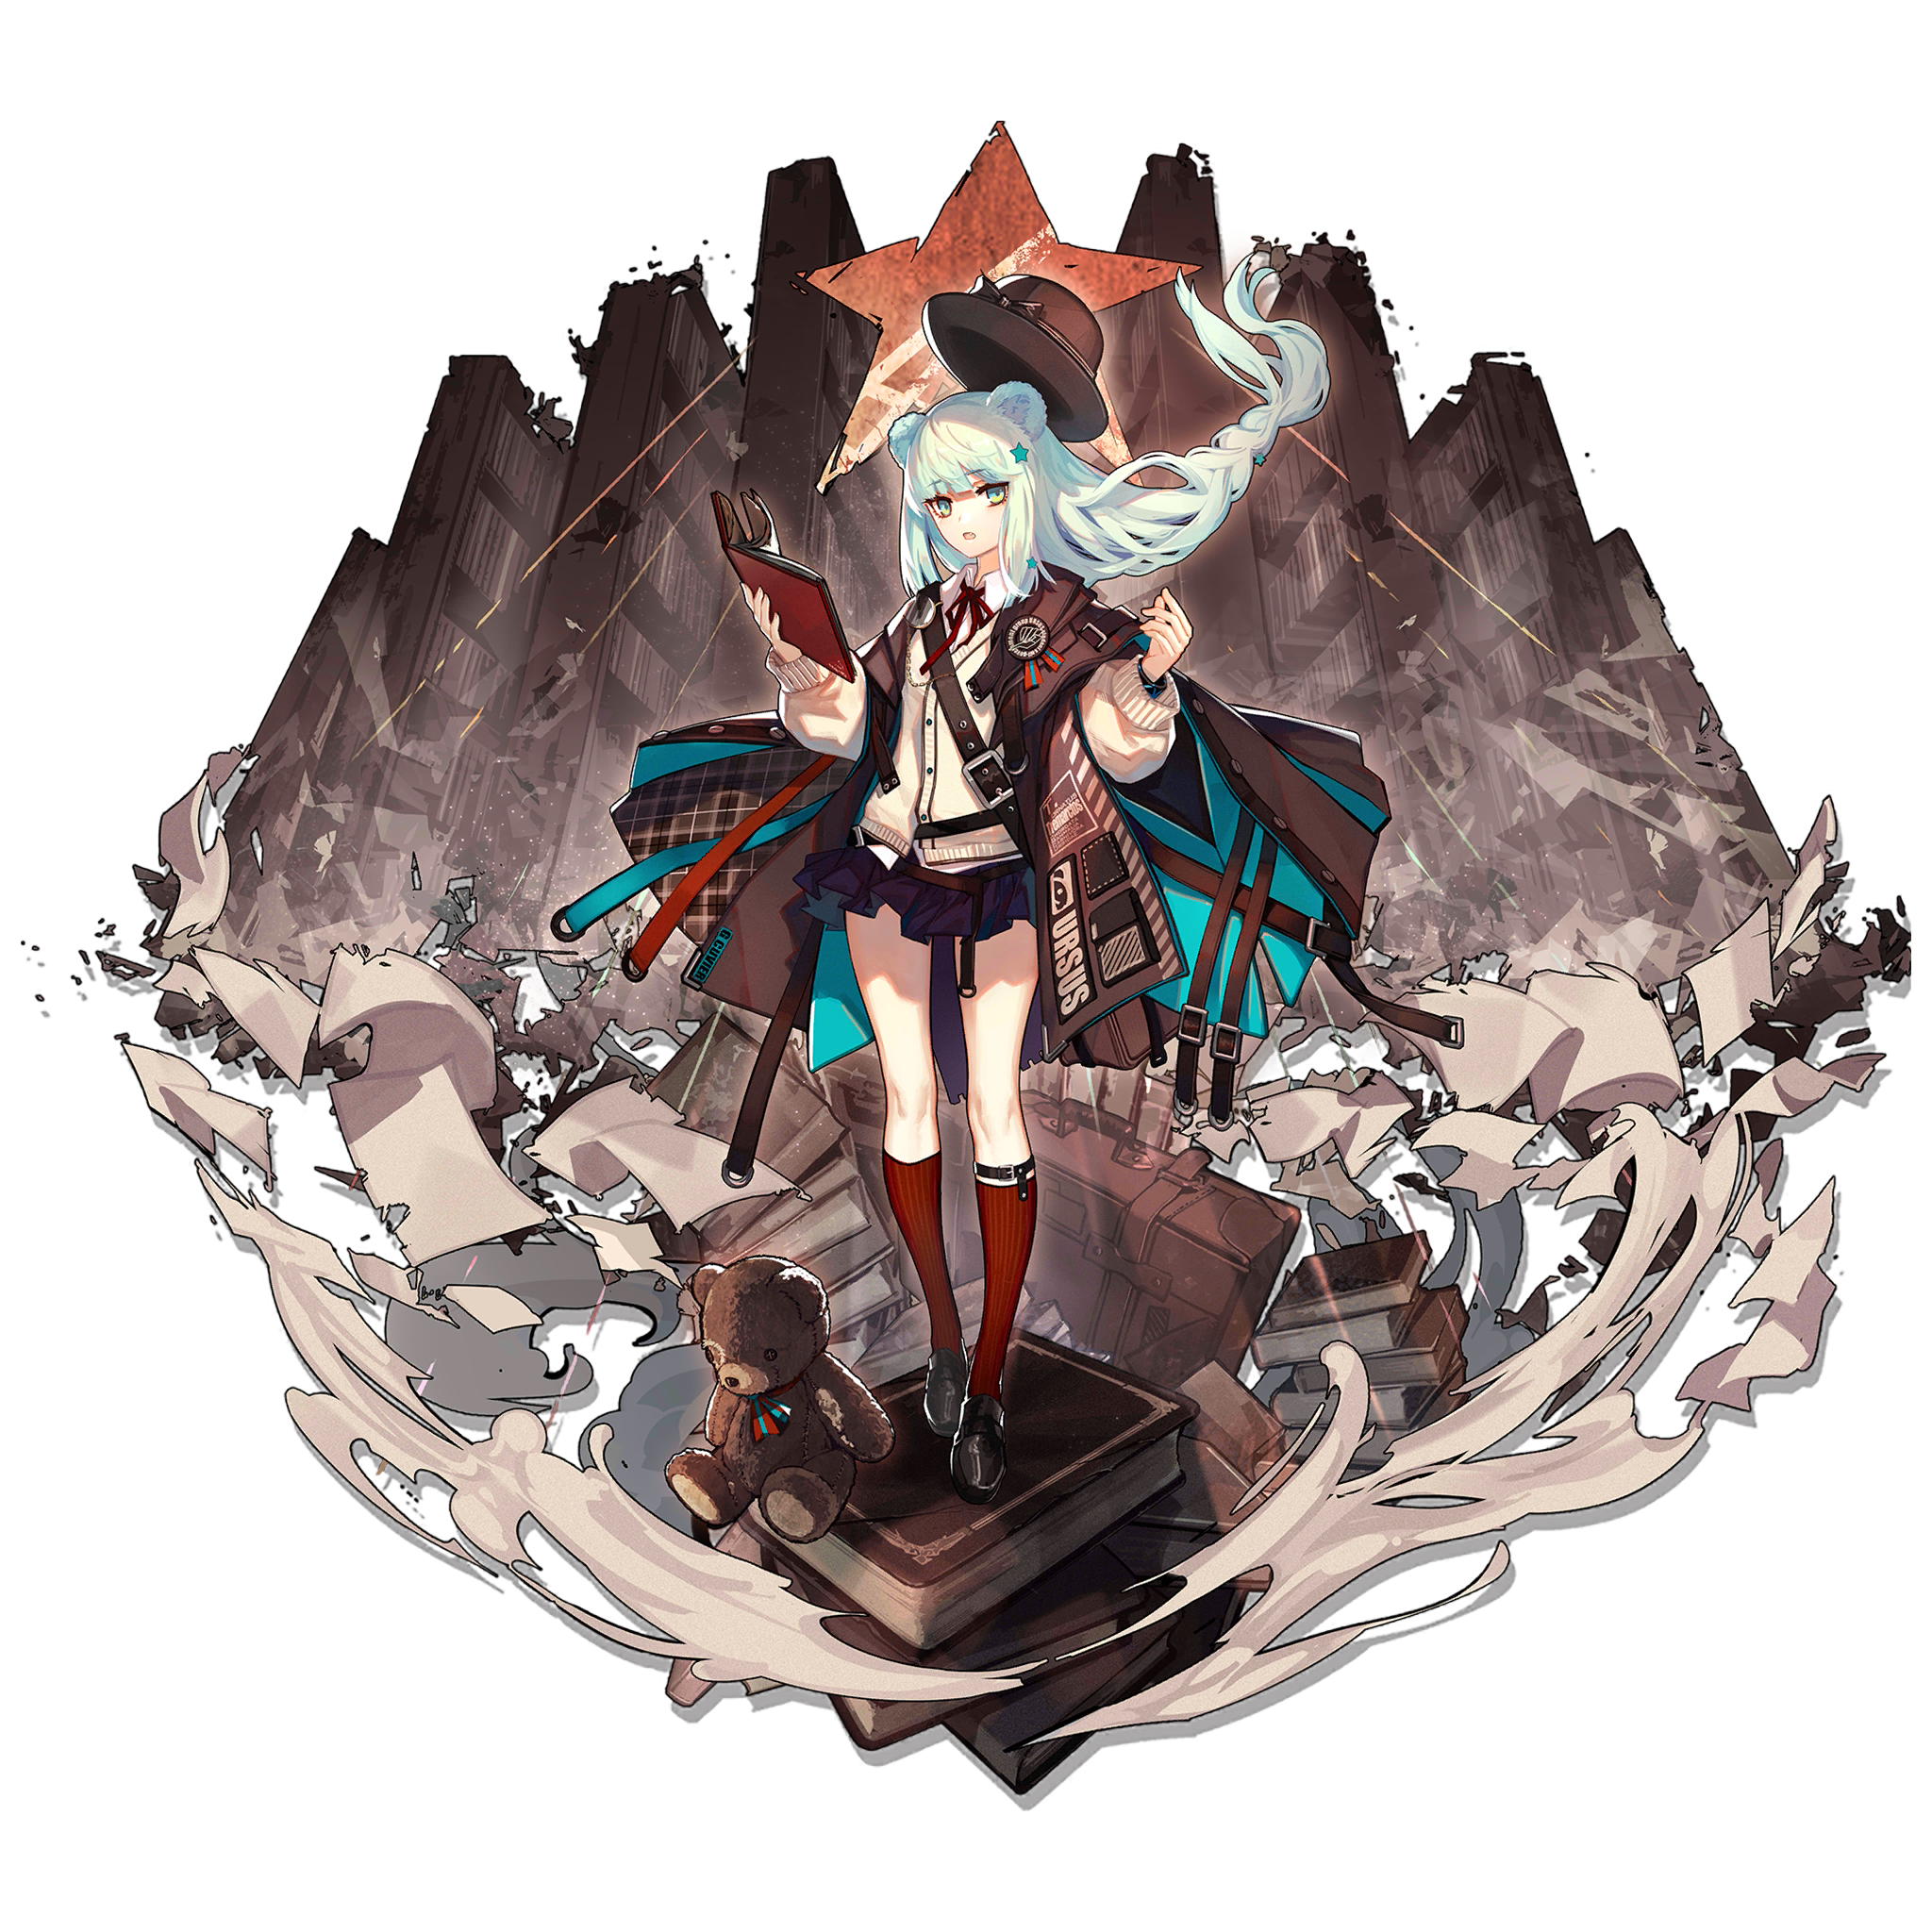 Pack 真理 skin 0 2.png